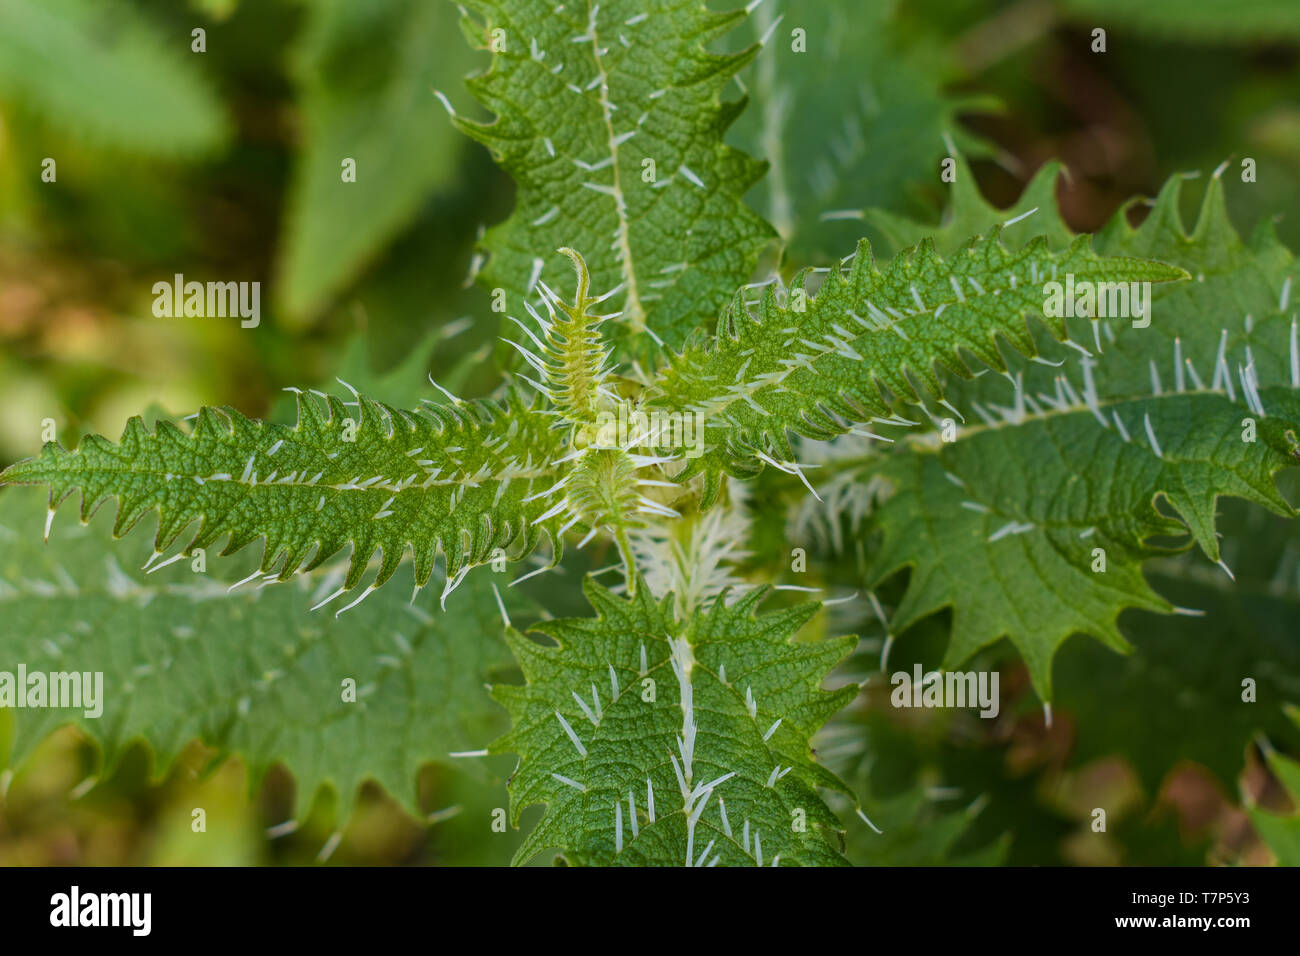 A stinging nettle with long spines Stock Photo